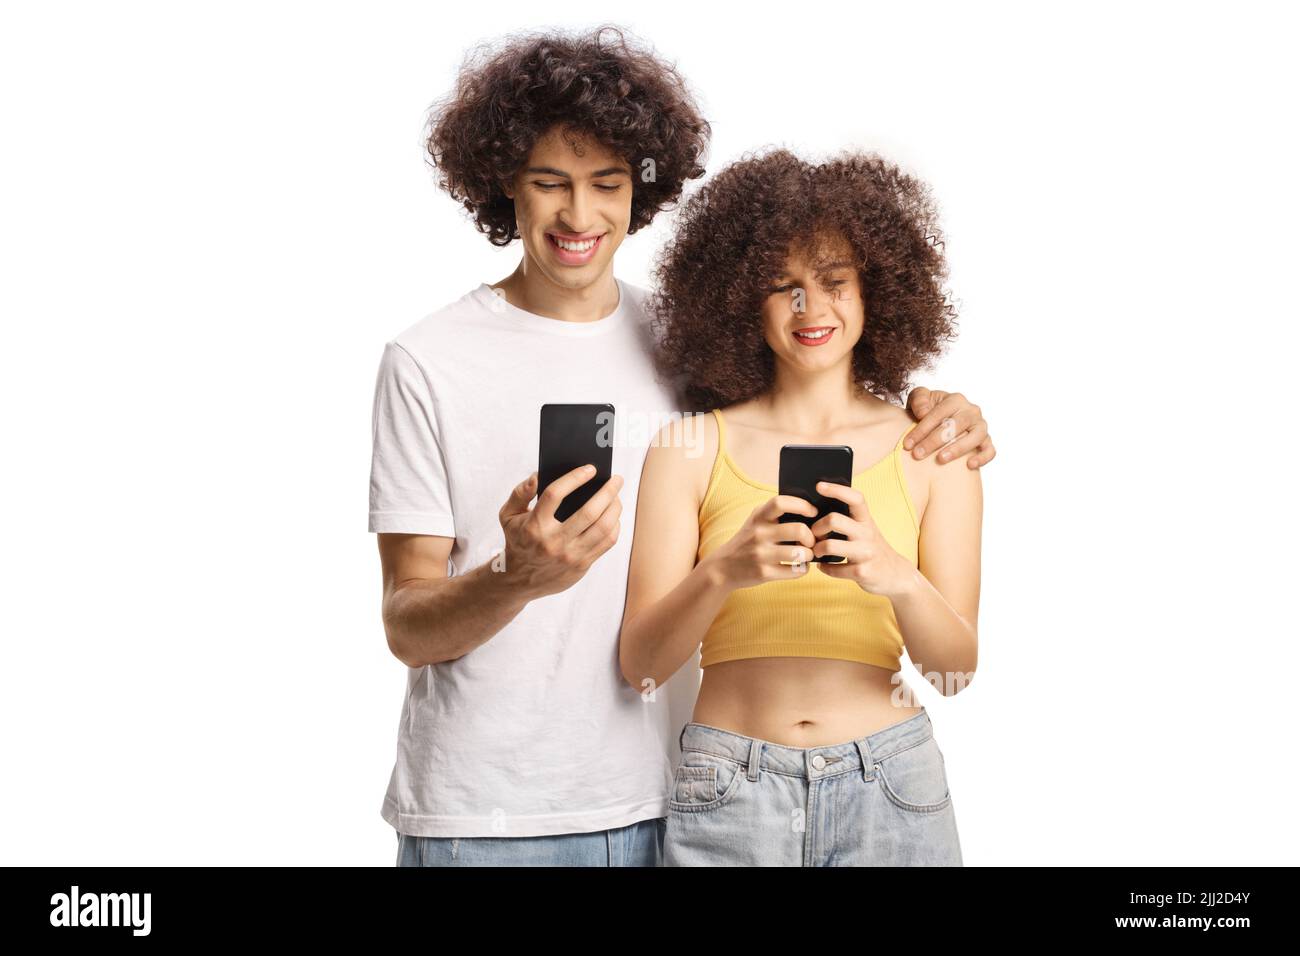 Guy and girl with curly hair using smartphones isolated on white background Stock Photo